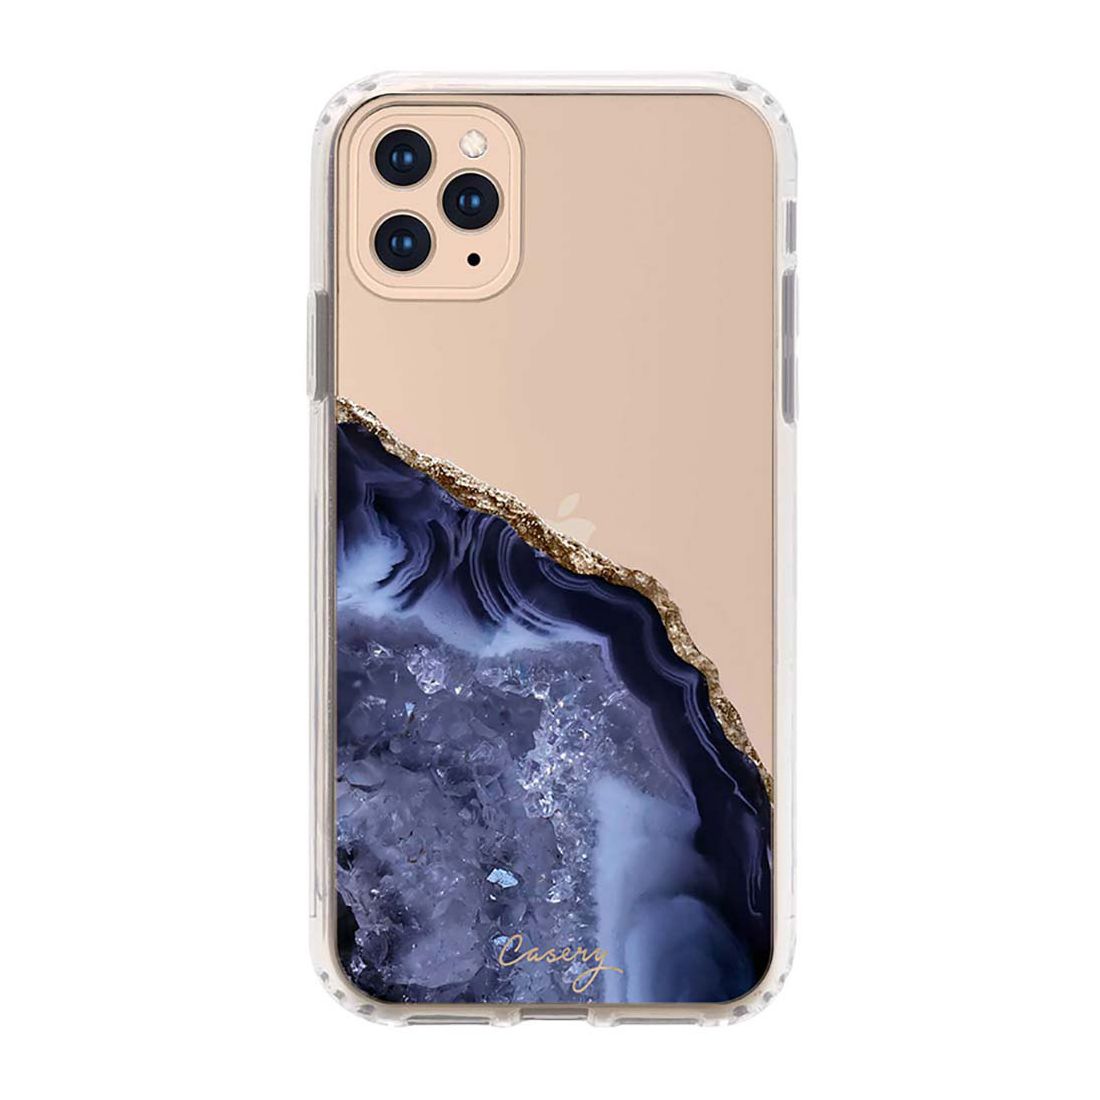 Casery Agate Case for iPhone 12 Pro Max Dark Blue